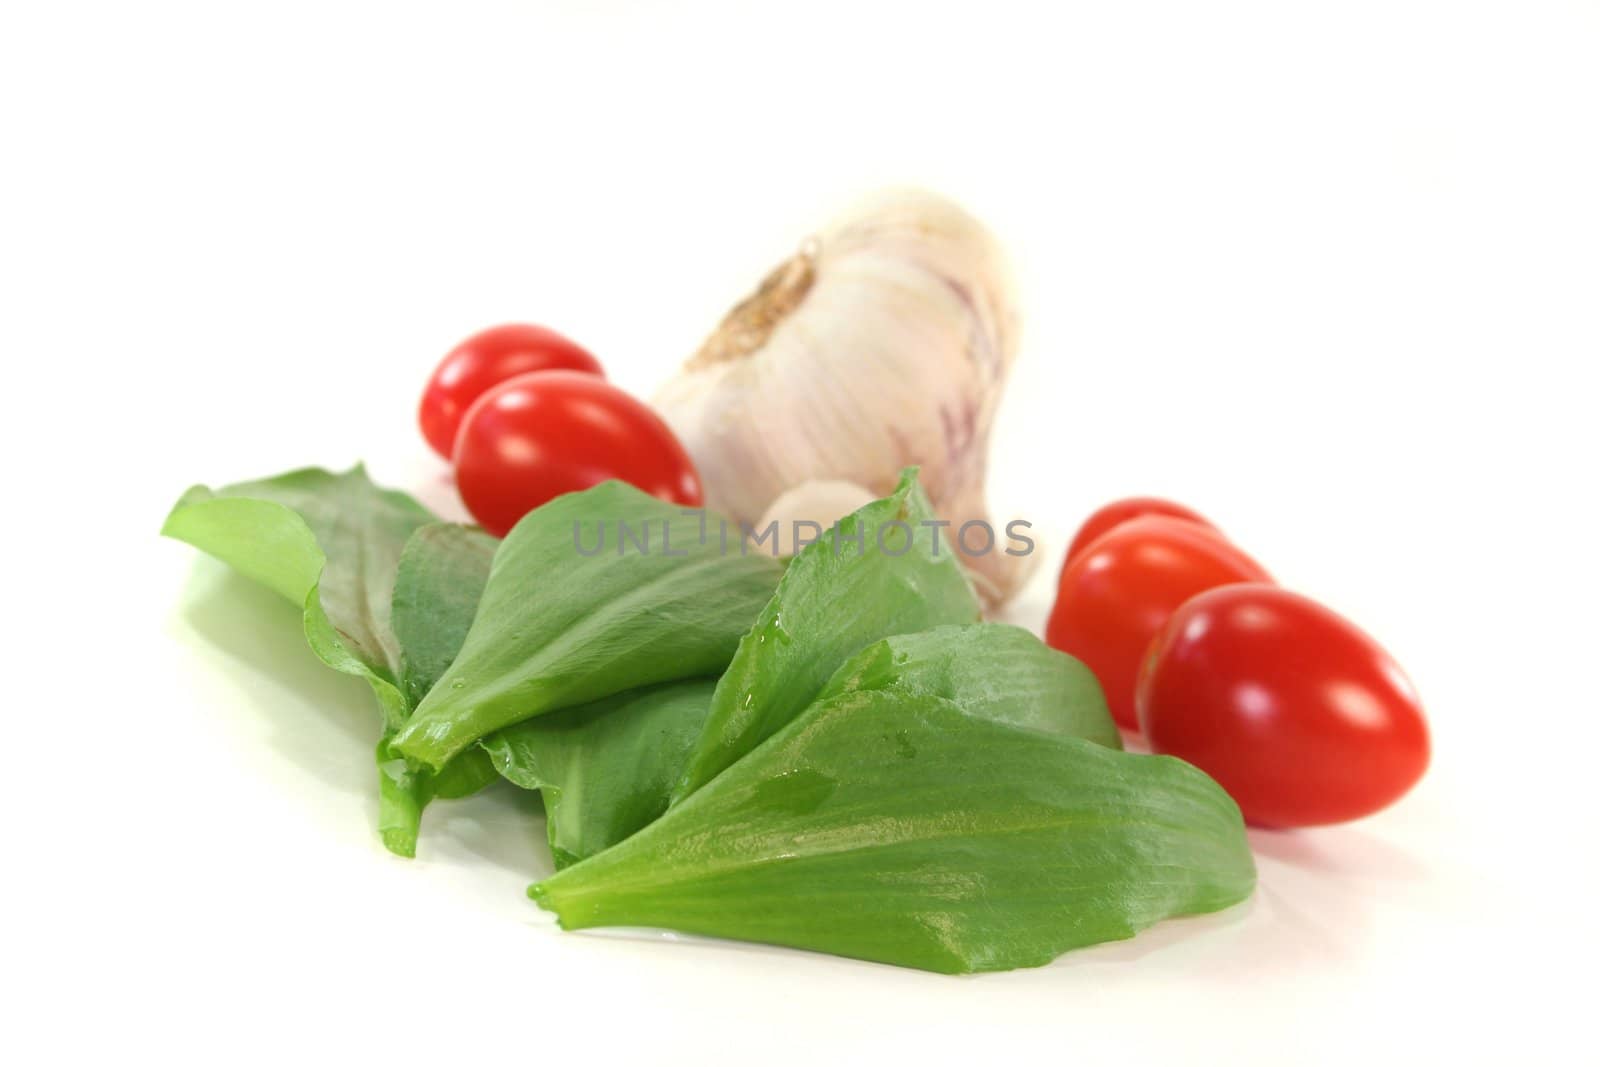 Wild garlic with tomatoes and garlic on a white background